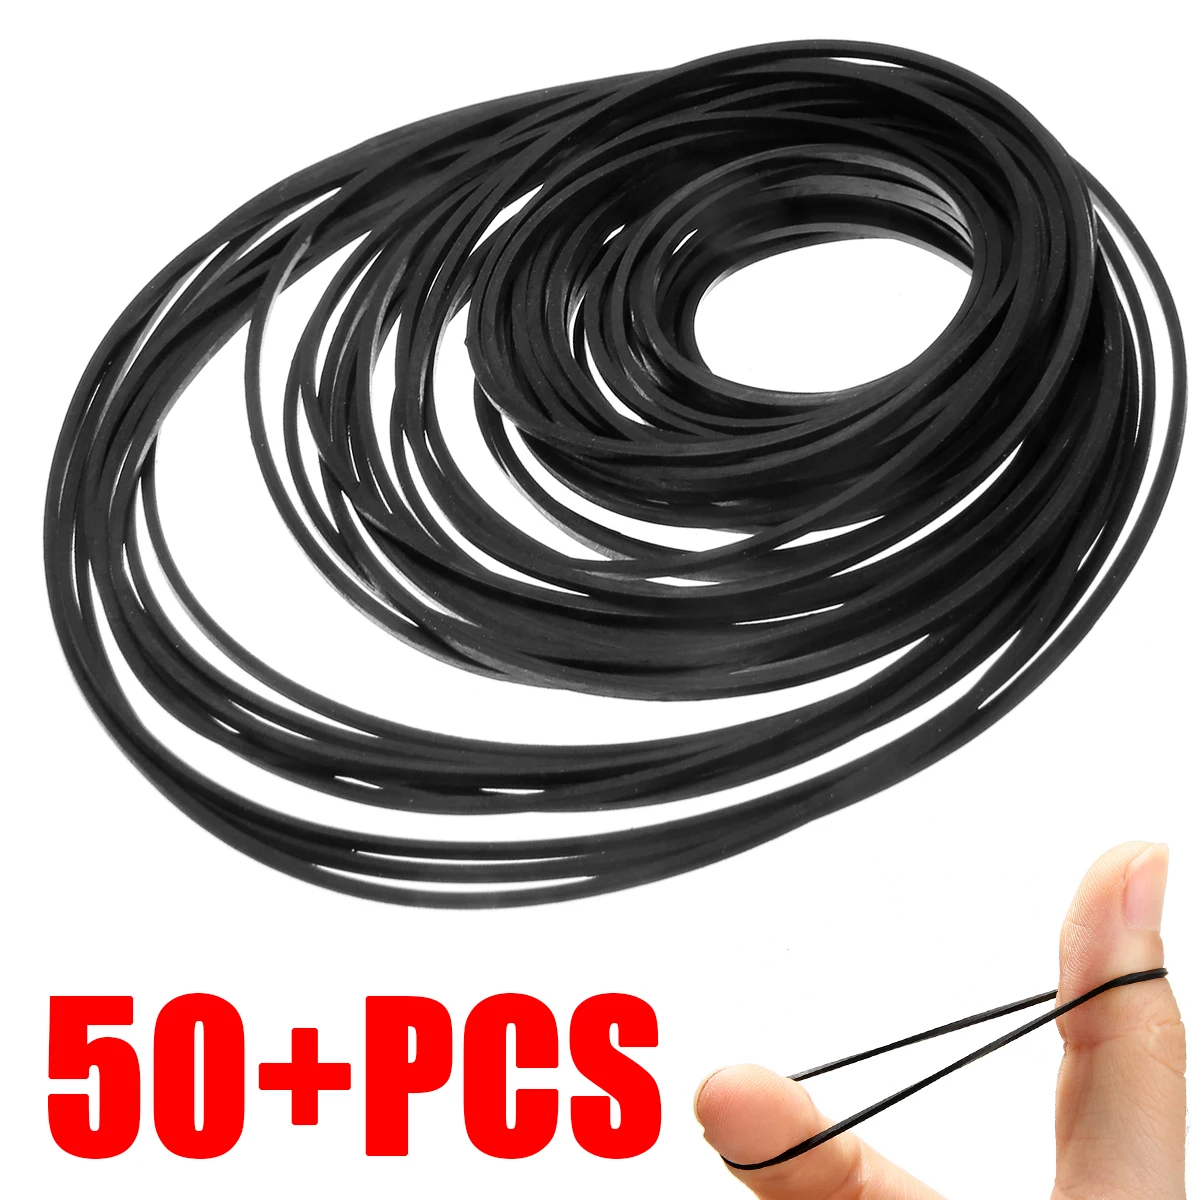 50+pcs Universal Repair Tape Machine Belt 40-130mm Mix Cassette Tape Machine Square Belt For Recorders Walkman lcd module computer flat machine constant strong system of the ming de system flying tiger system 7 inch screen universal new ge